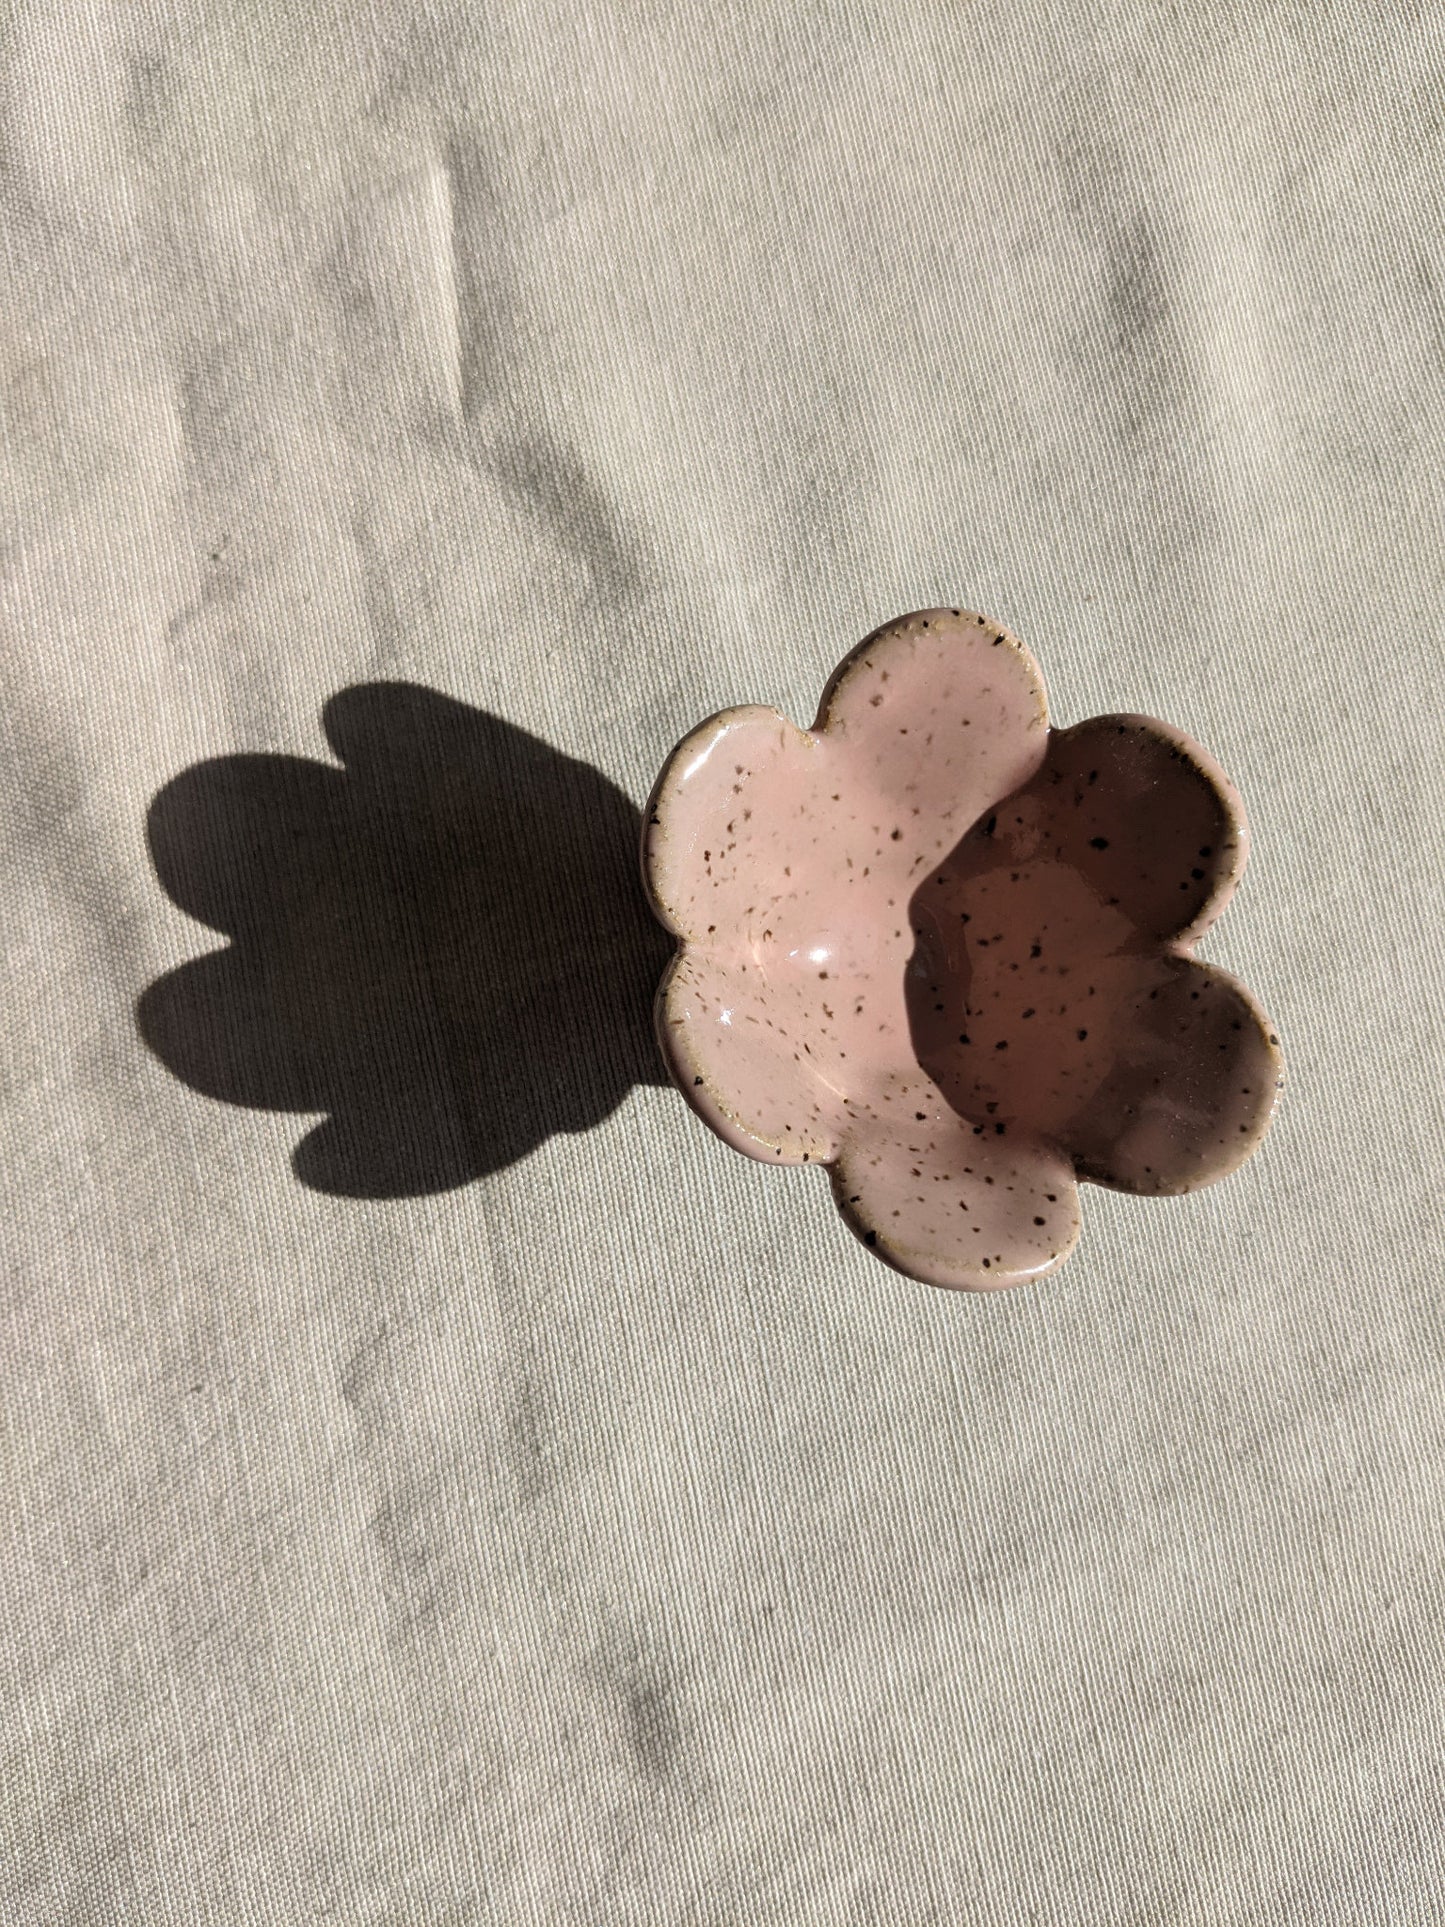 Daisy Dish - Speckled Pink